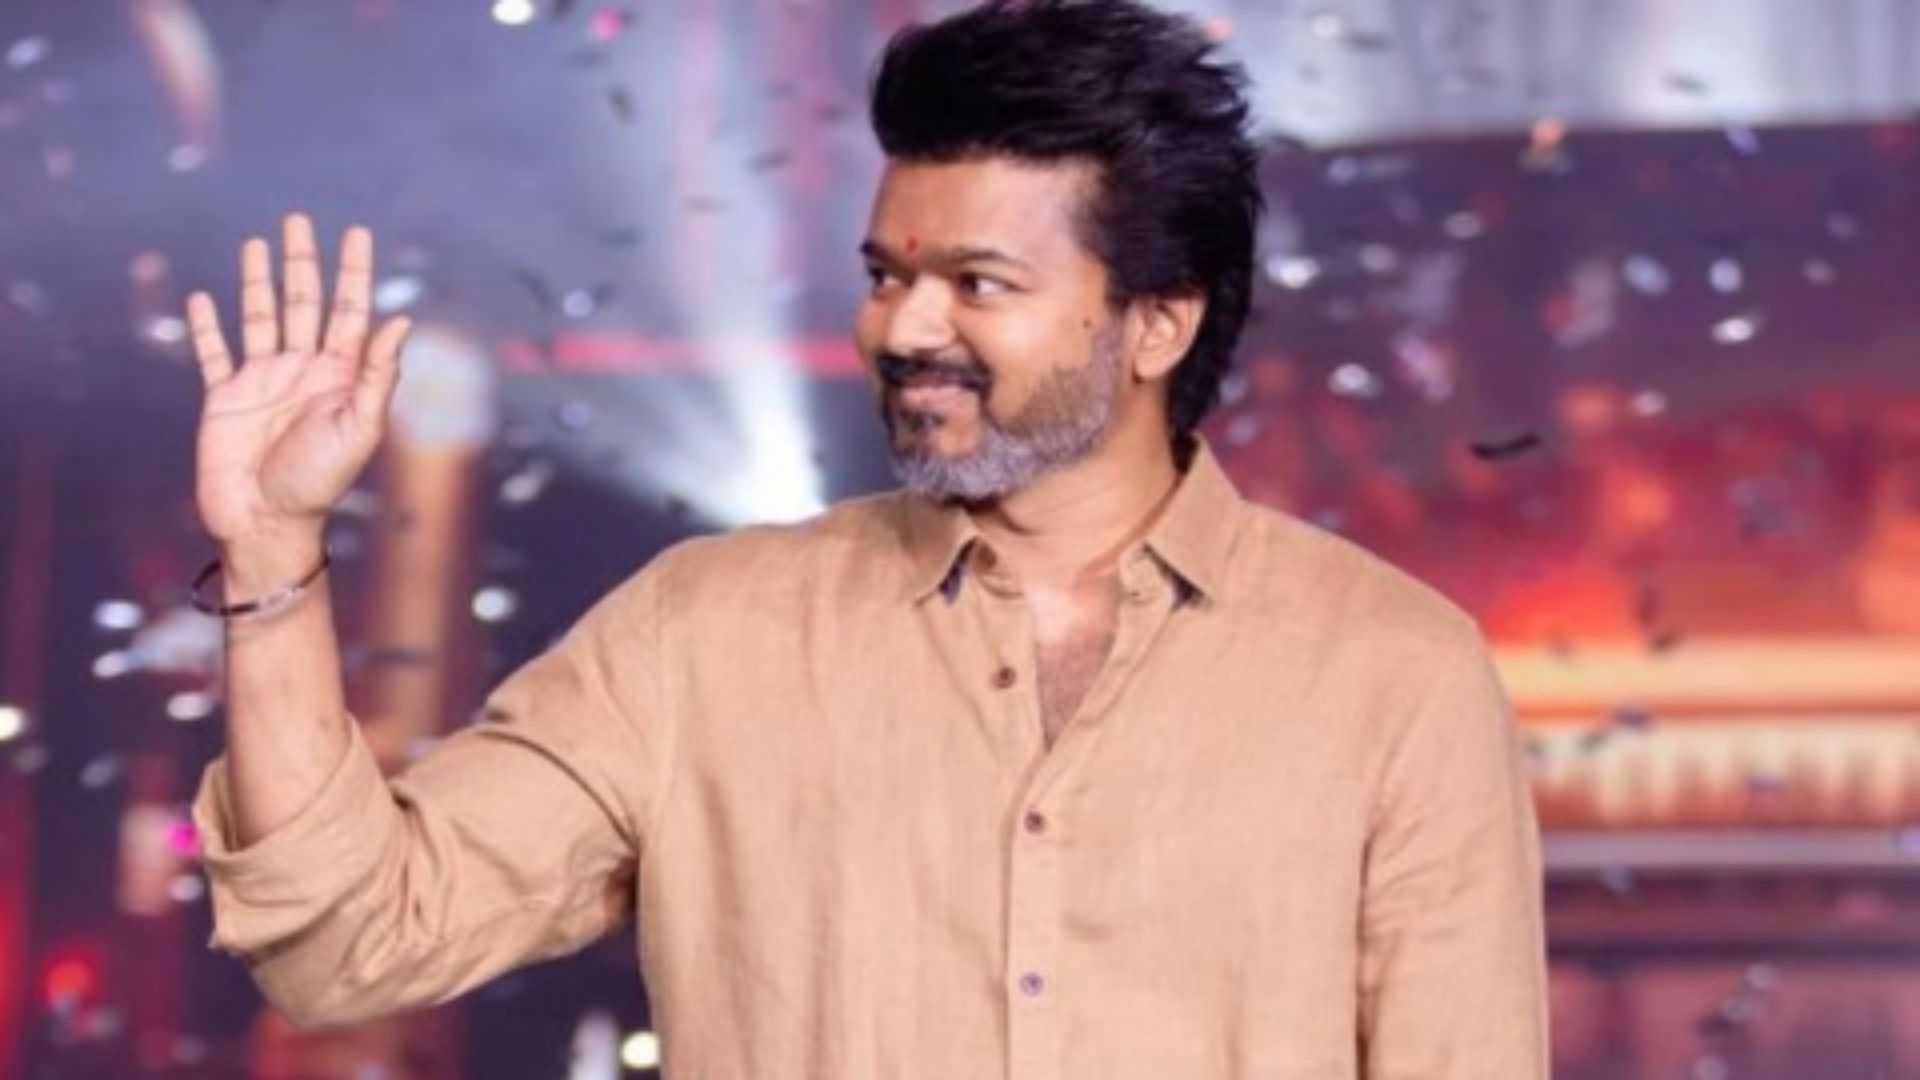 Thalapathy Vijay enters politics and announces his political party